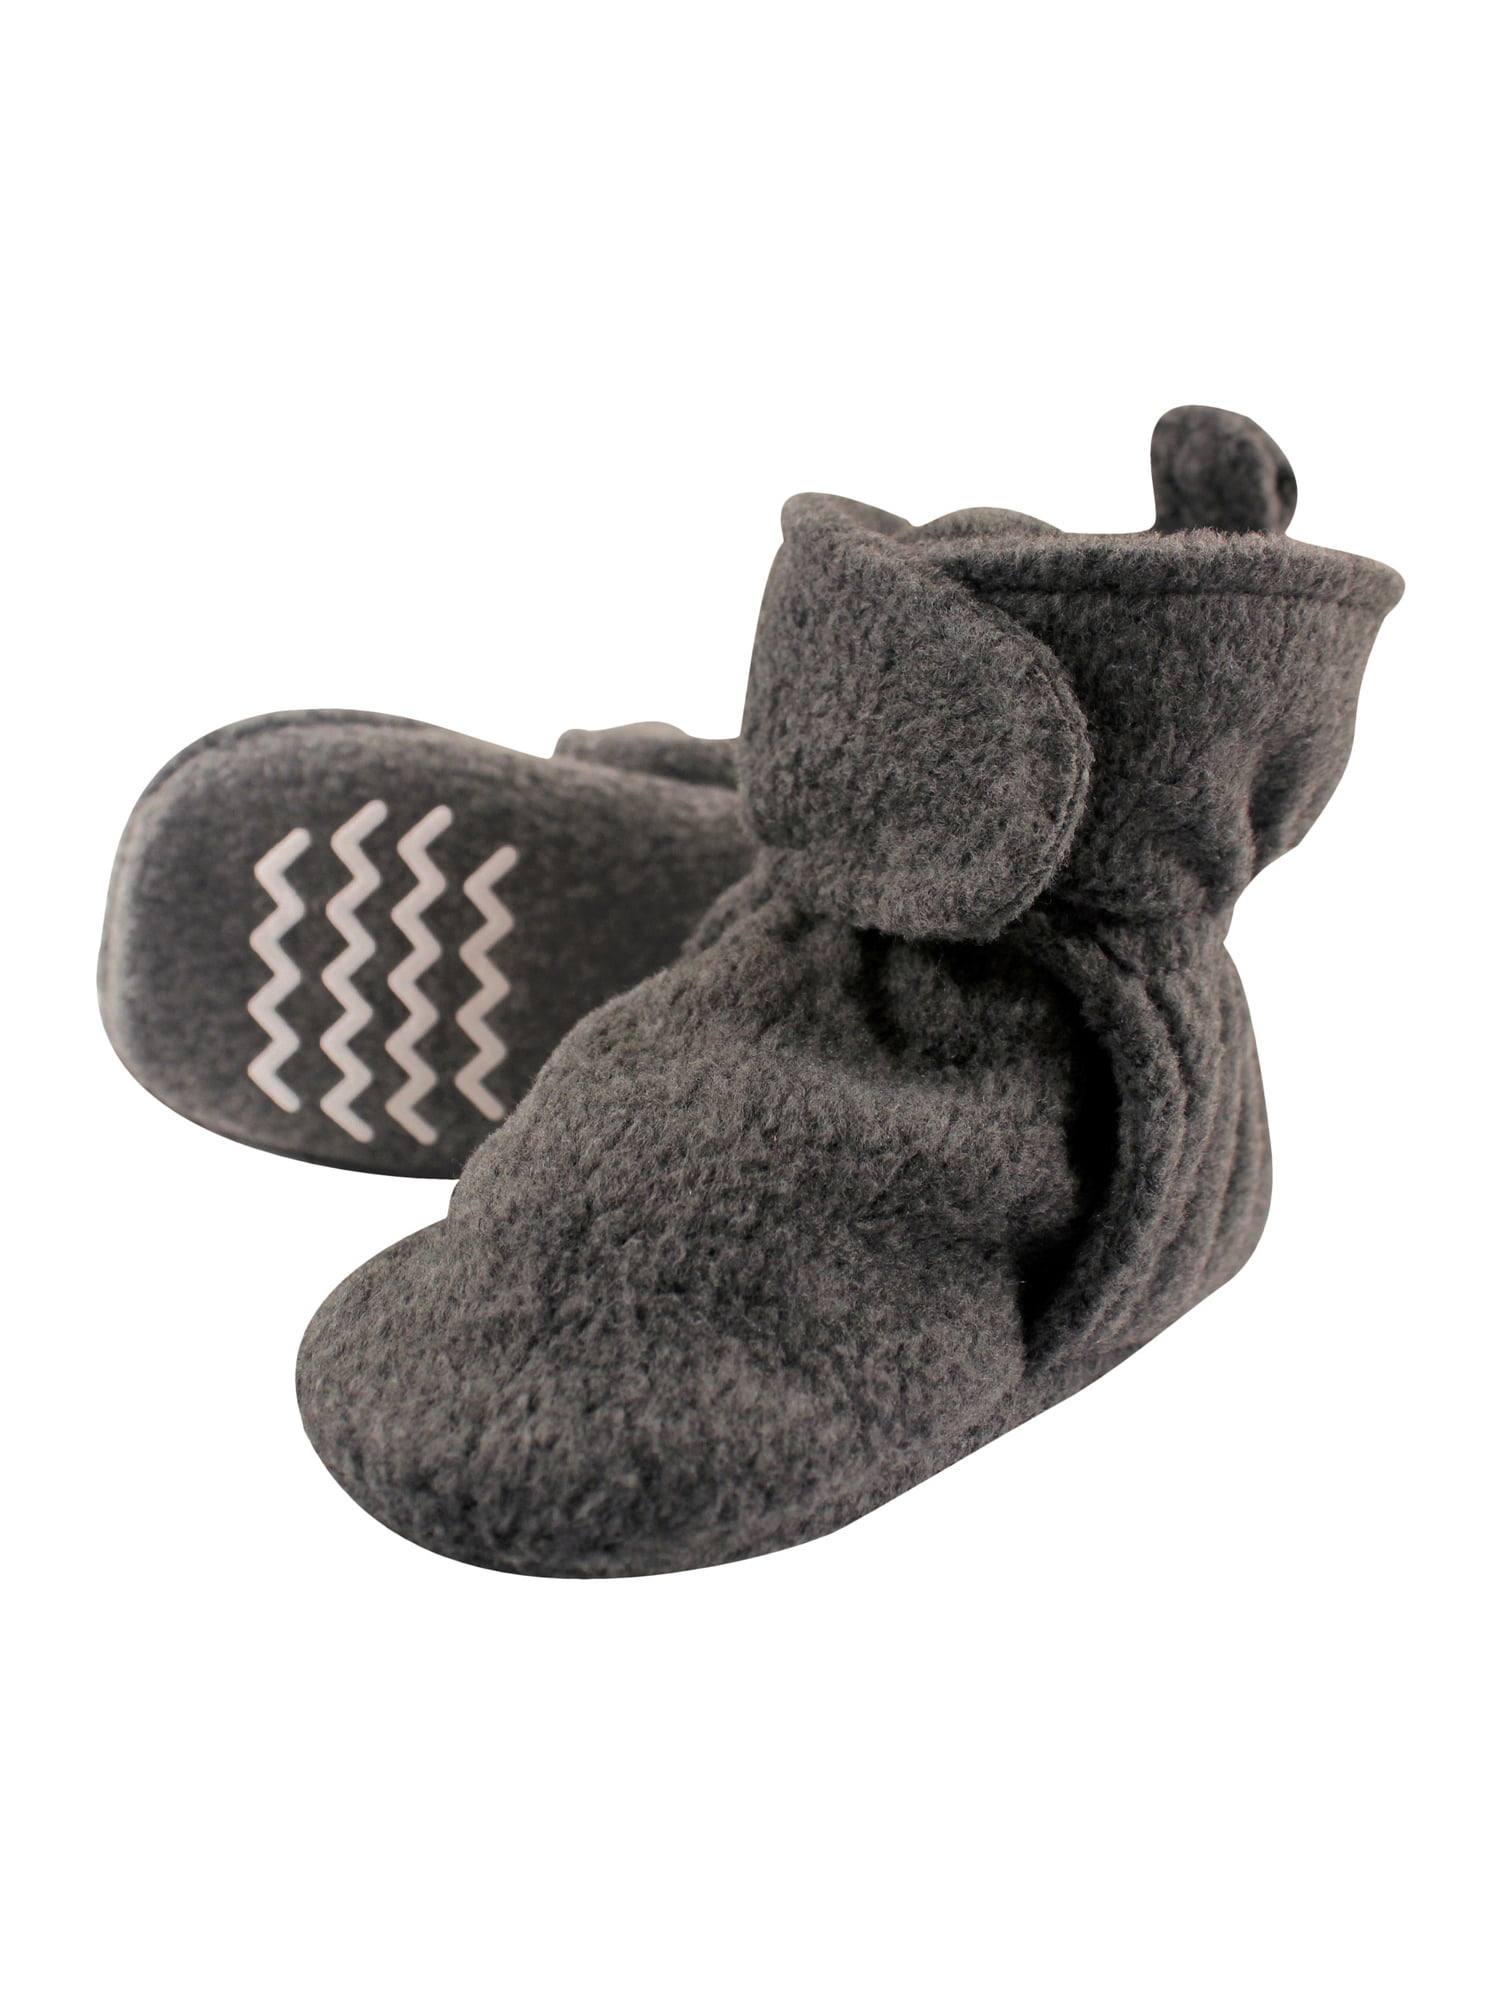 Hudson Baby Baby Cozy Sherpa Booties with Non Skid Bottom